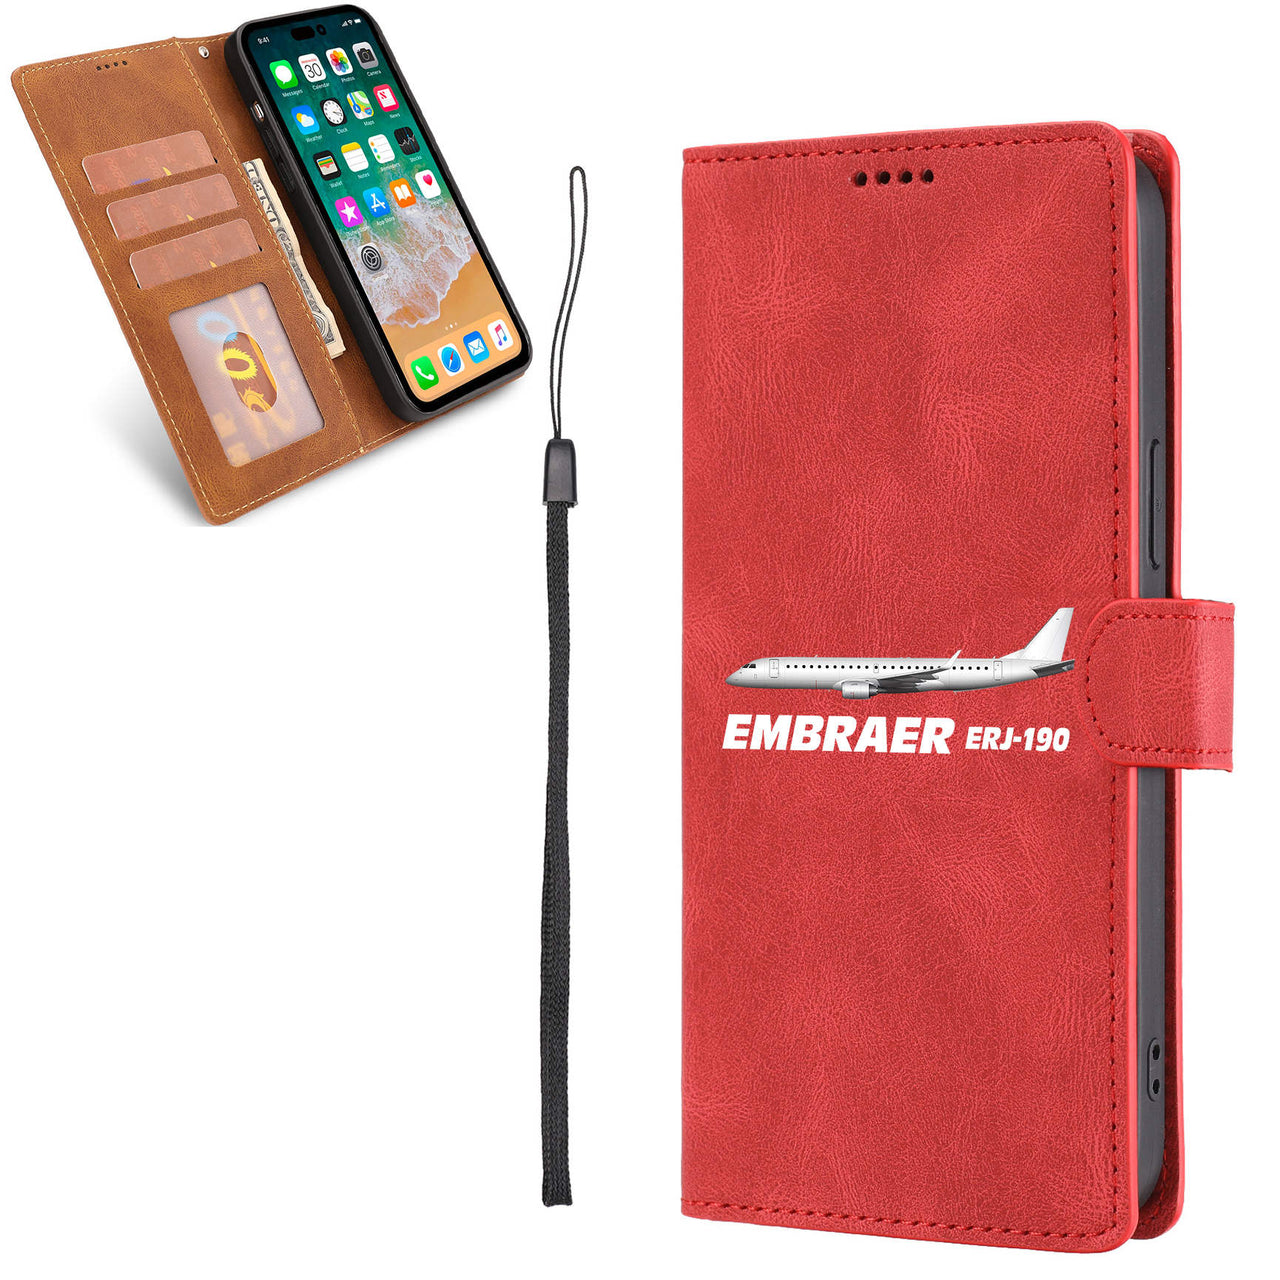 The Embraer ERJ-190 Designed Leather iPhone Cases